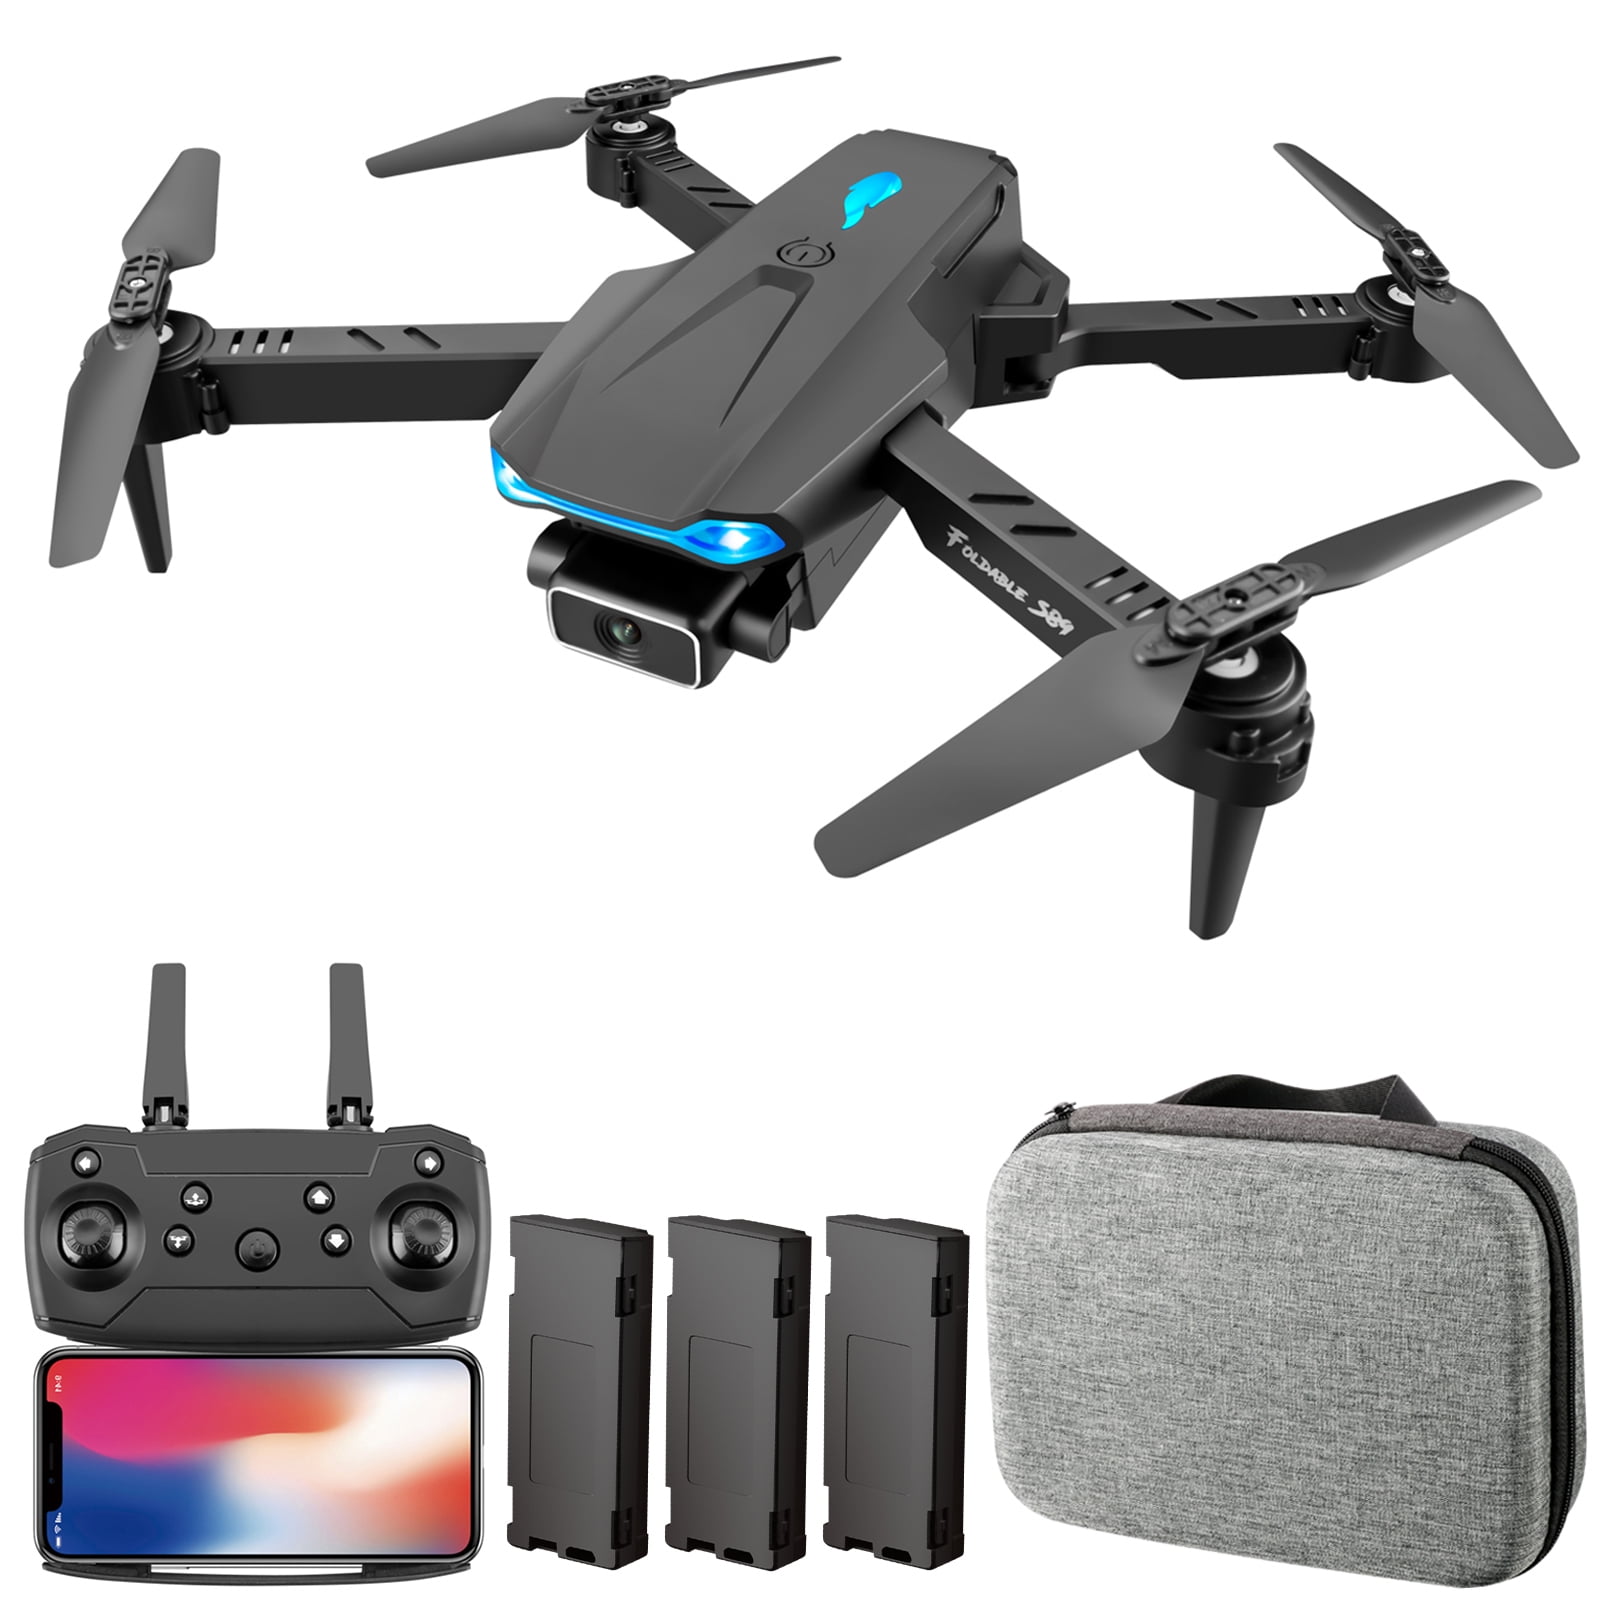 Details about   New MINI DRONE 4K WIFI FPV With HD Camera Quadcopter Remote Control Drone 